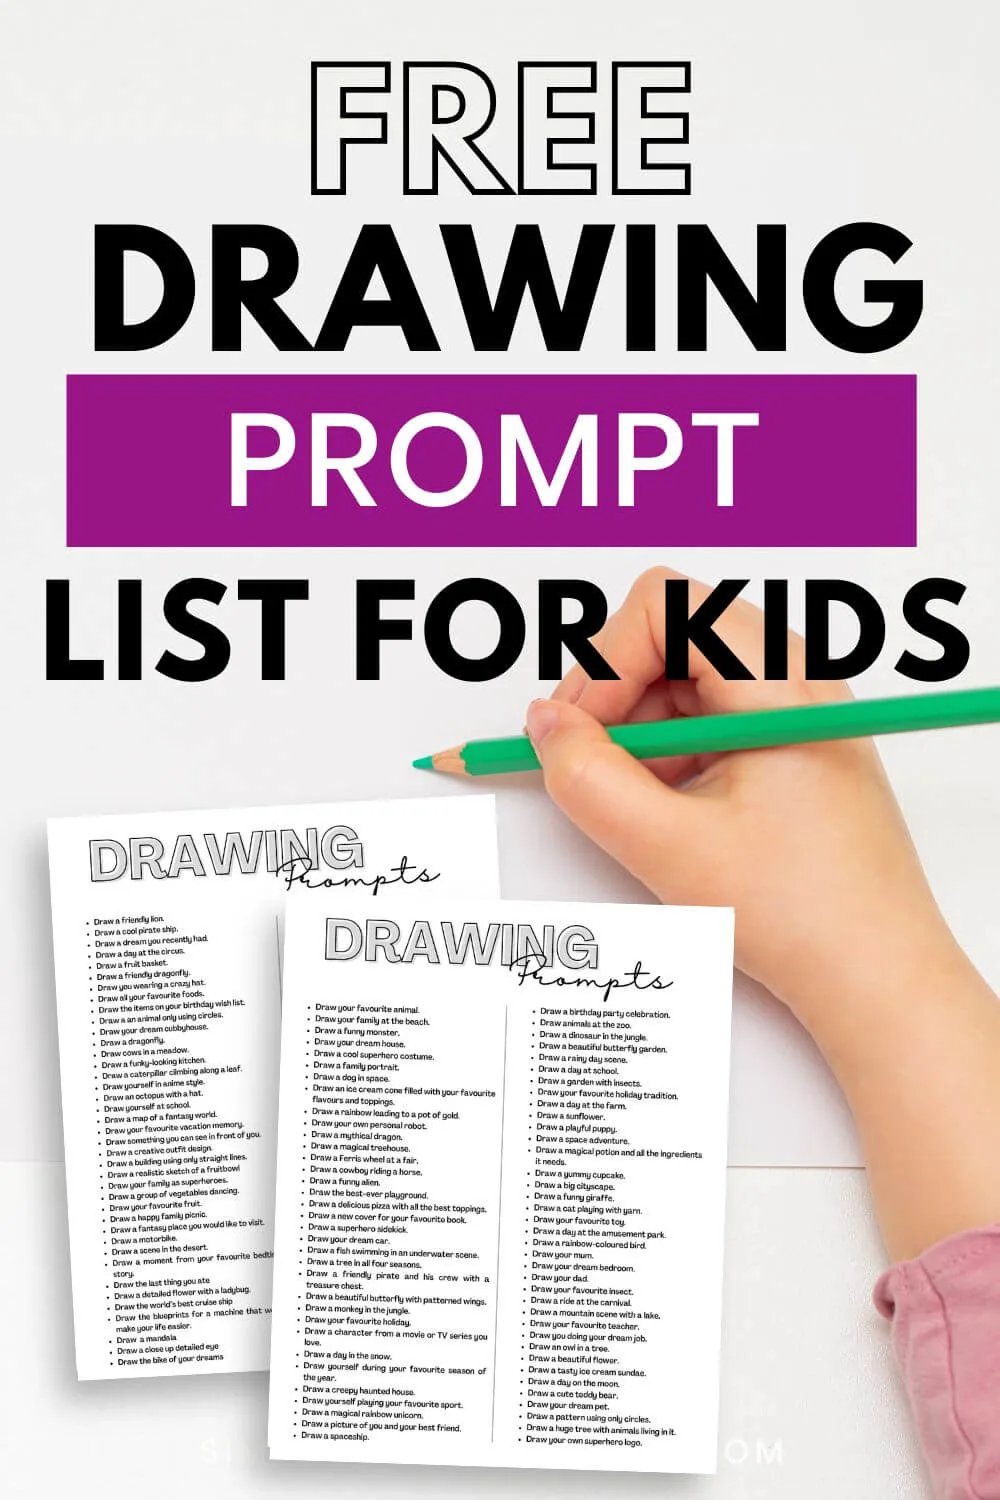 Free drawing prompt list for kids pinterest image.